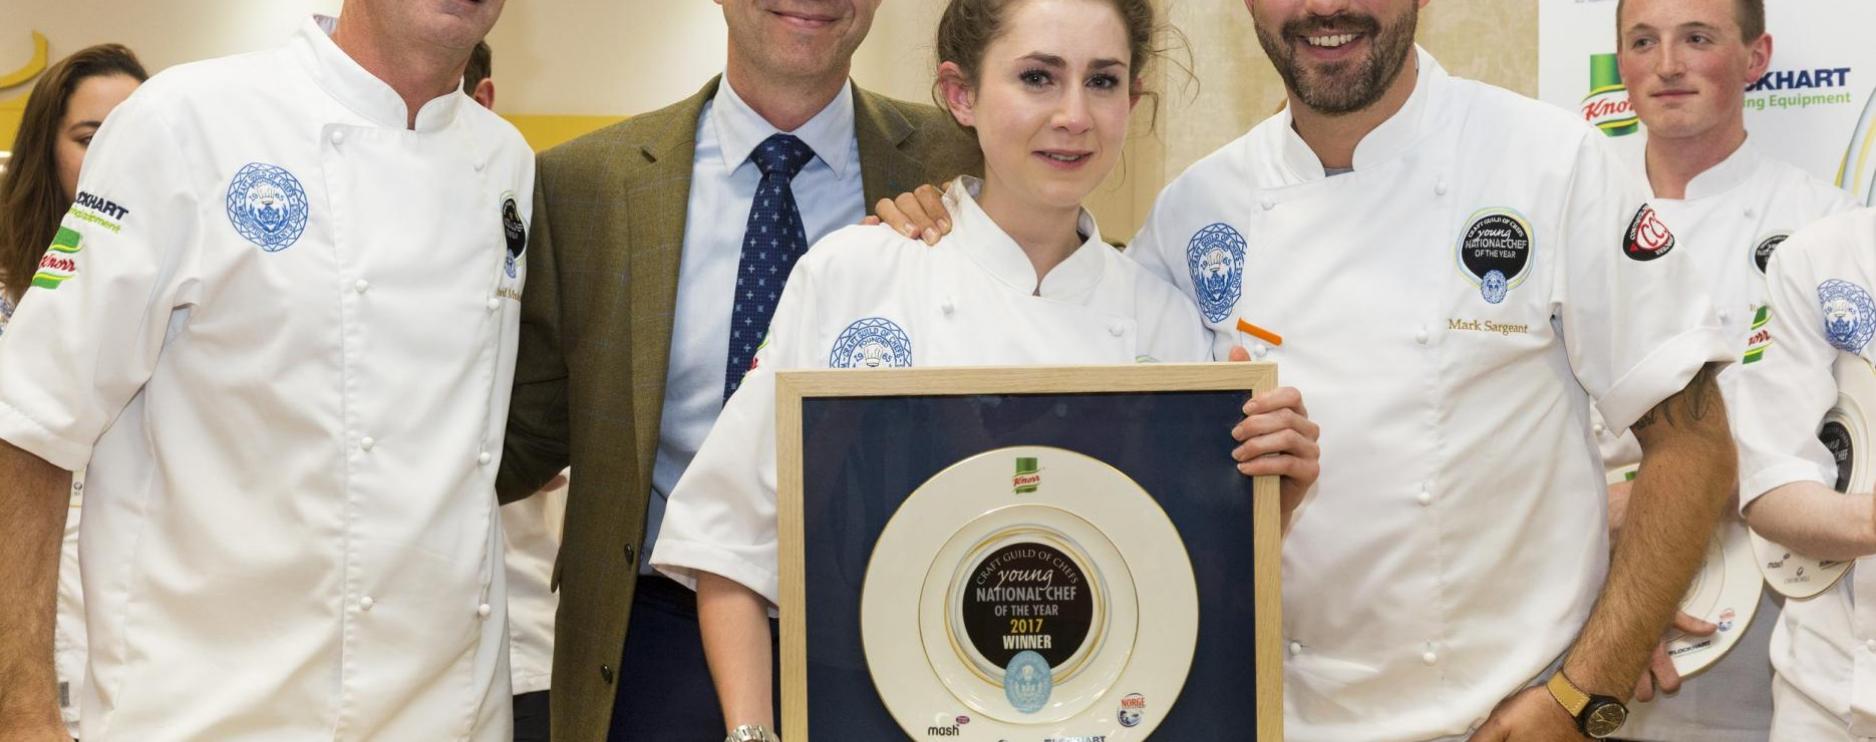 Ruth Hansom wins Young National Chef of the Year 